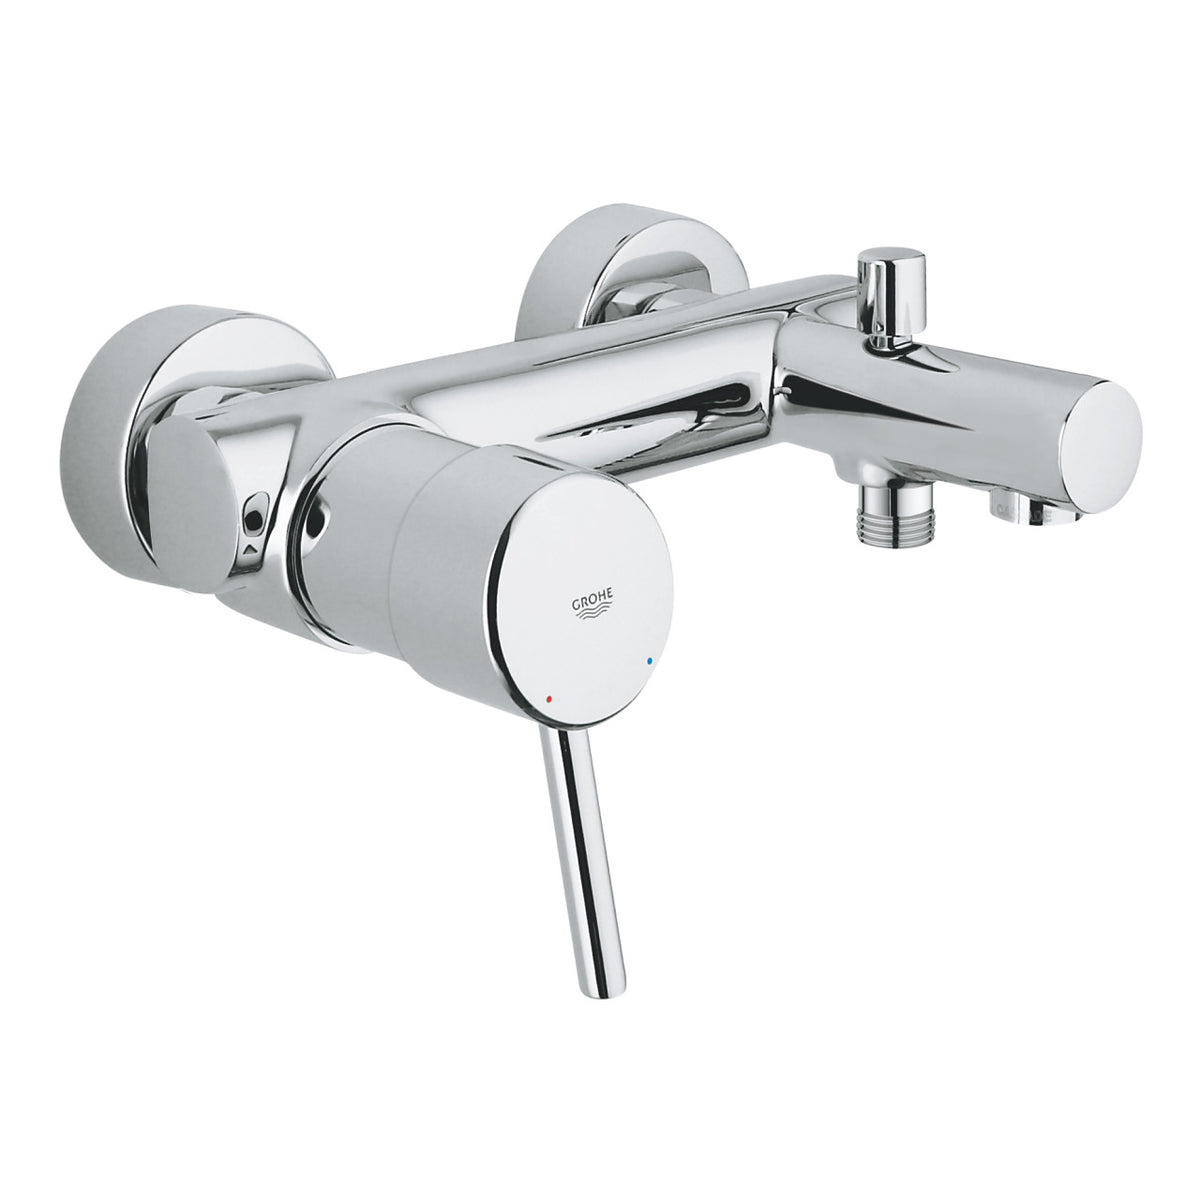 Grohe Concetto kád csaptelep-0